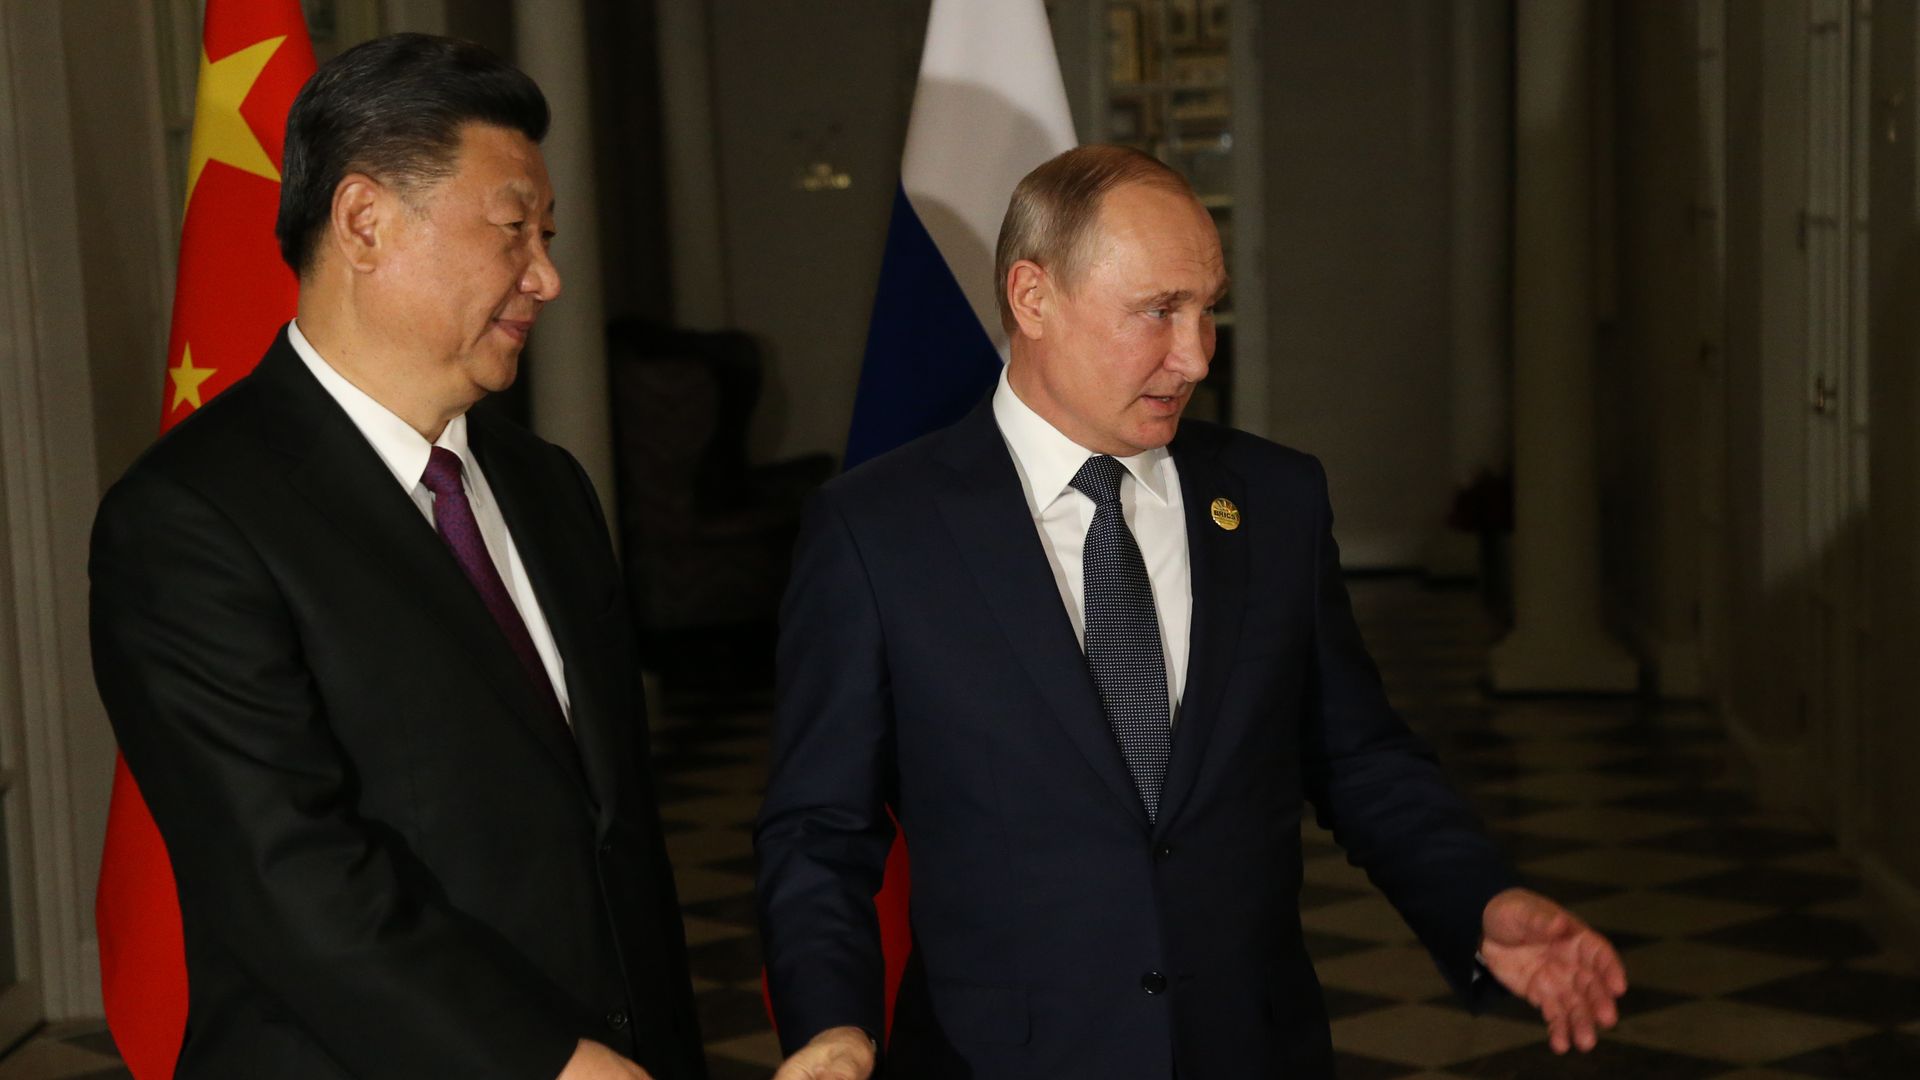 Chinese president Xi Jinping stands next to Russian president Vladimir Putin in front of both countries' flags